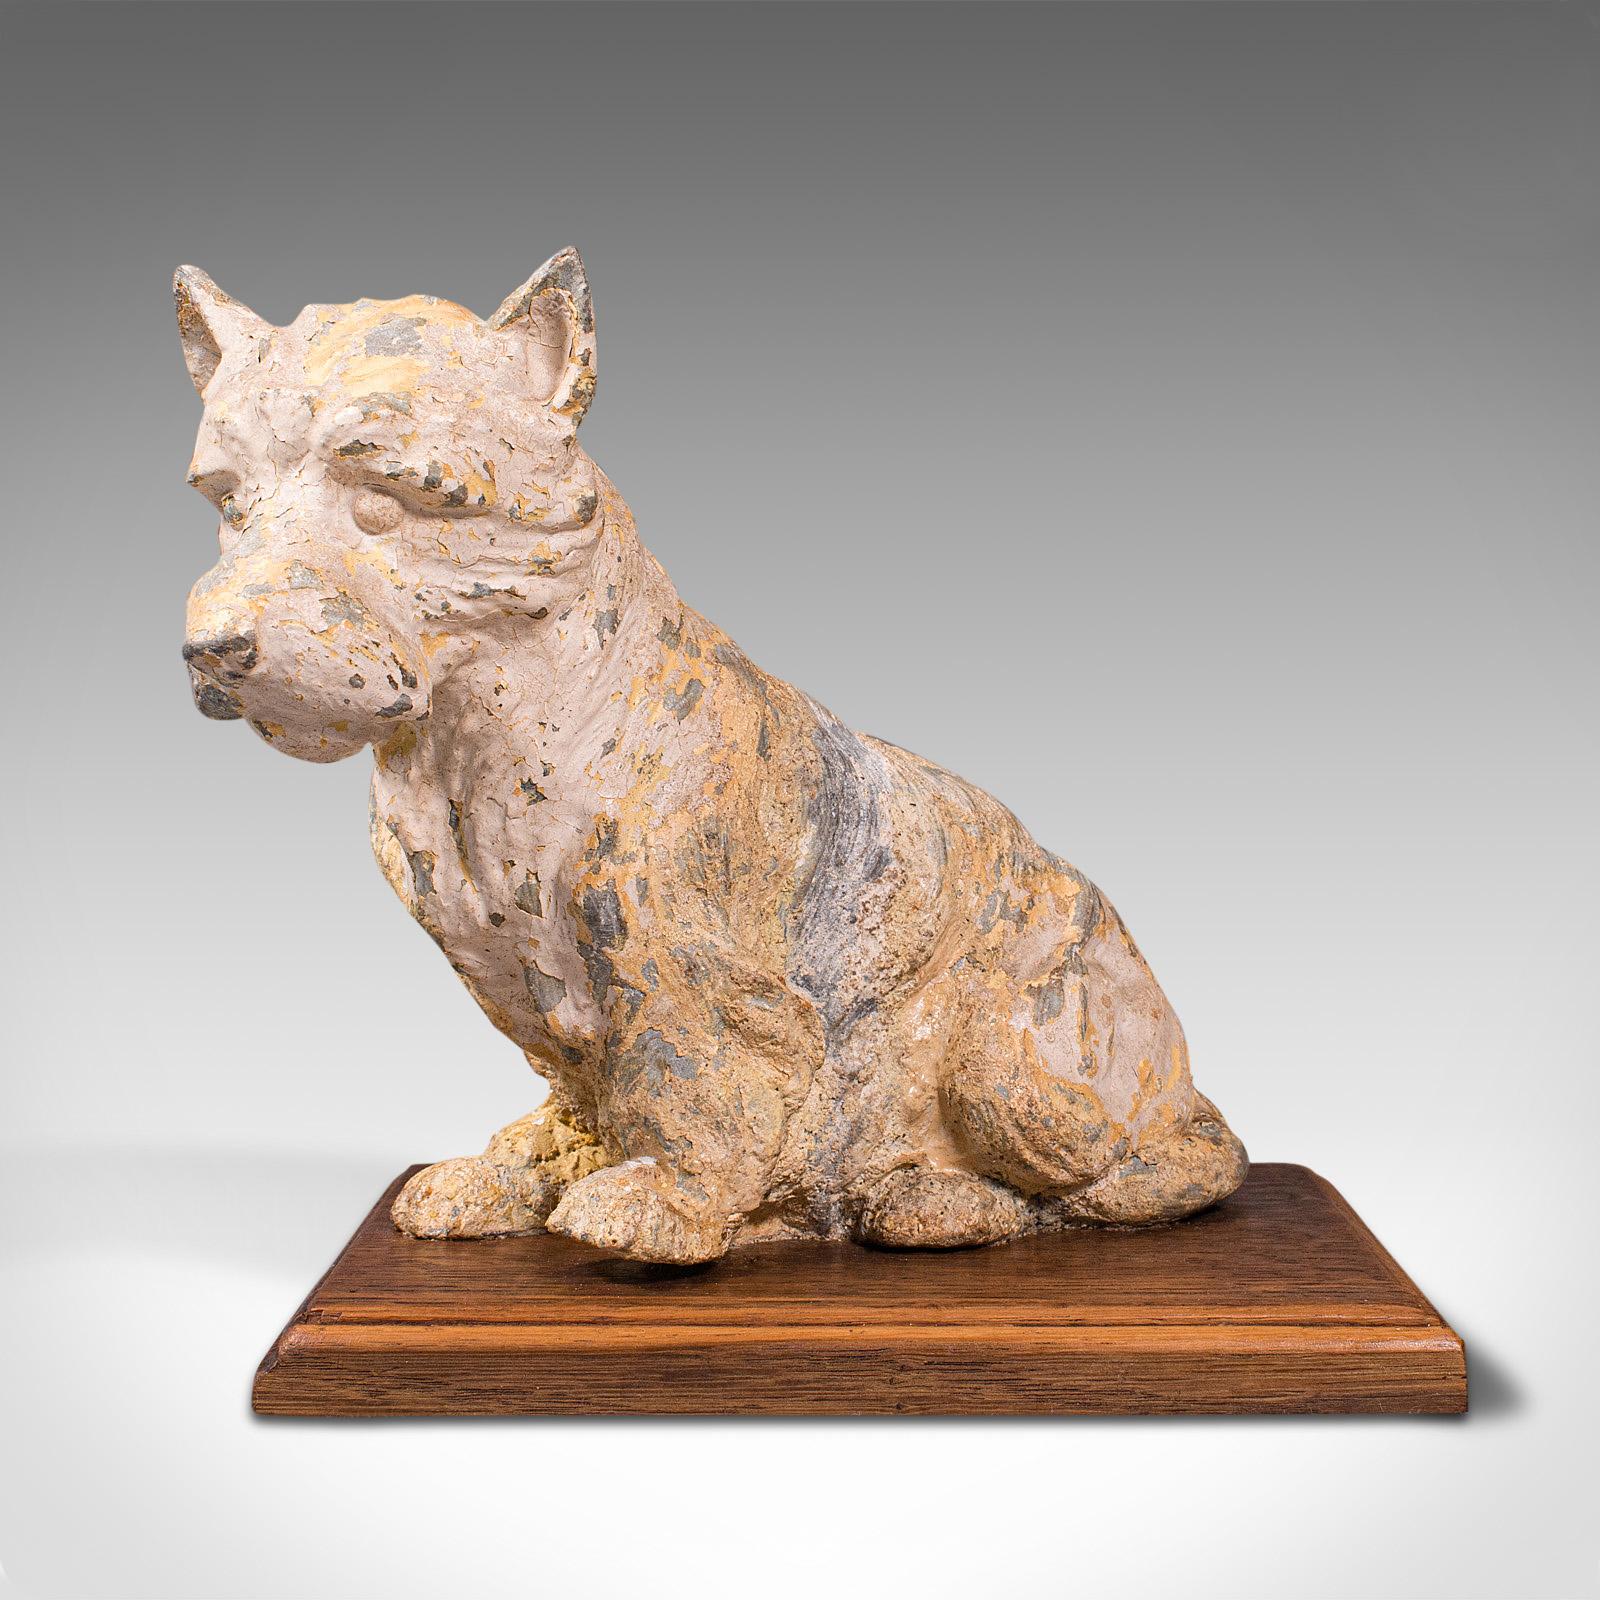 This is an antique decorative West Highland Terrier. A British, spelter over oak ornamental Westie dog, dating to the Edwardian period, circa 1910.

Nicely detailed ornament with copious character and charm
Displays a desirable aged patina and in